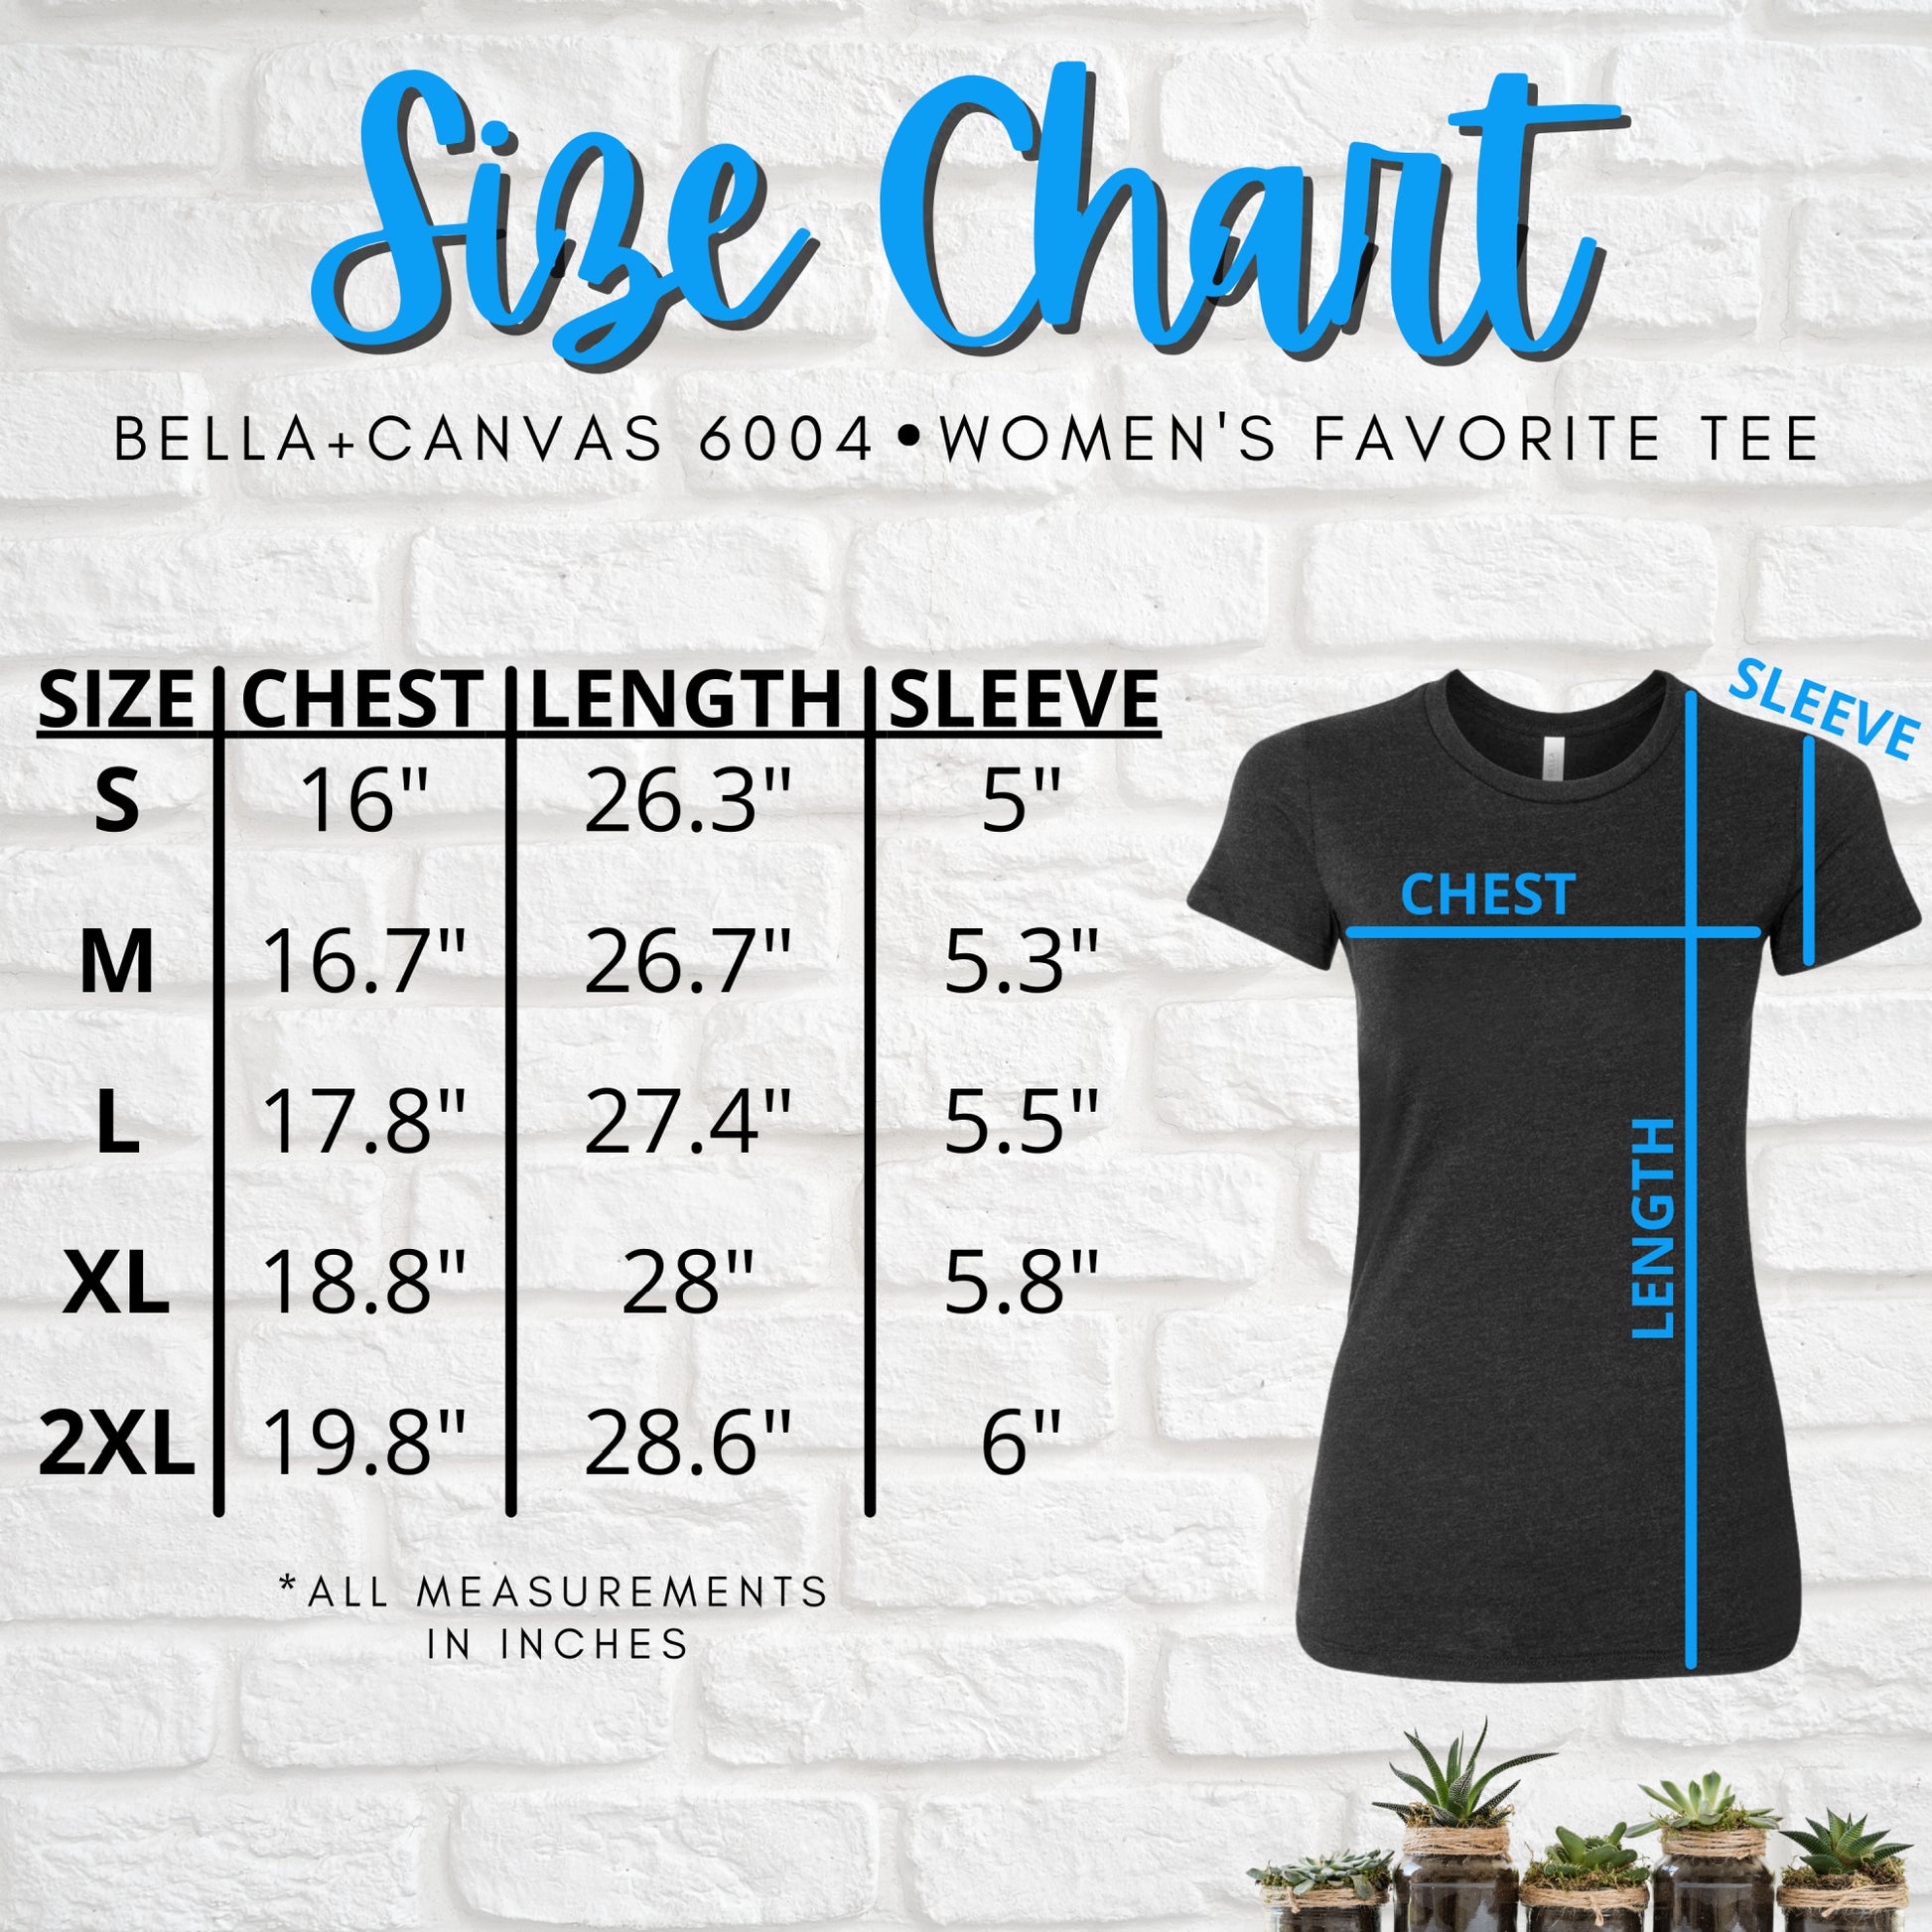 Size chart for this shirt